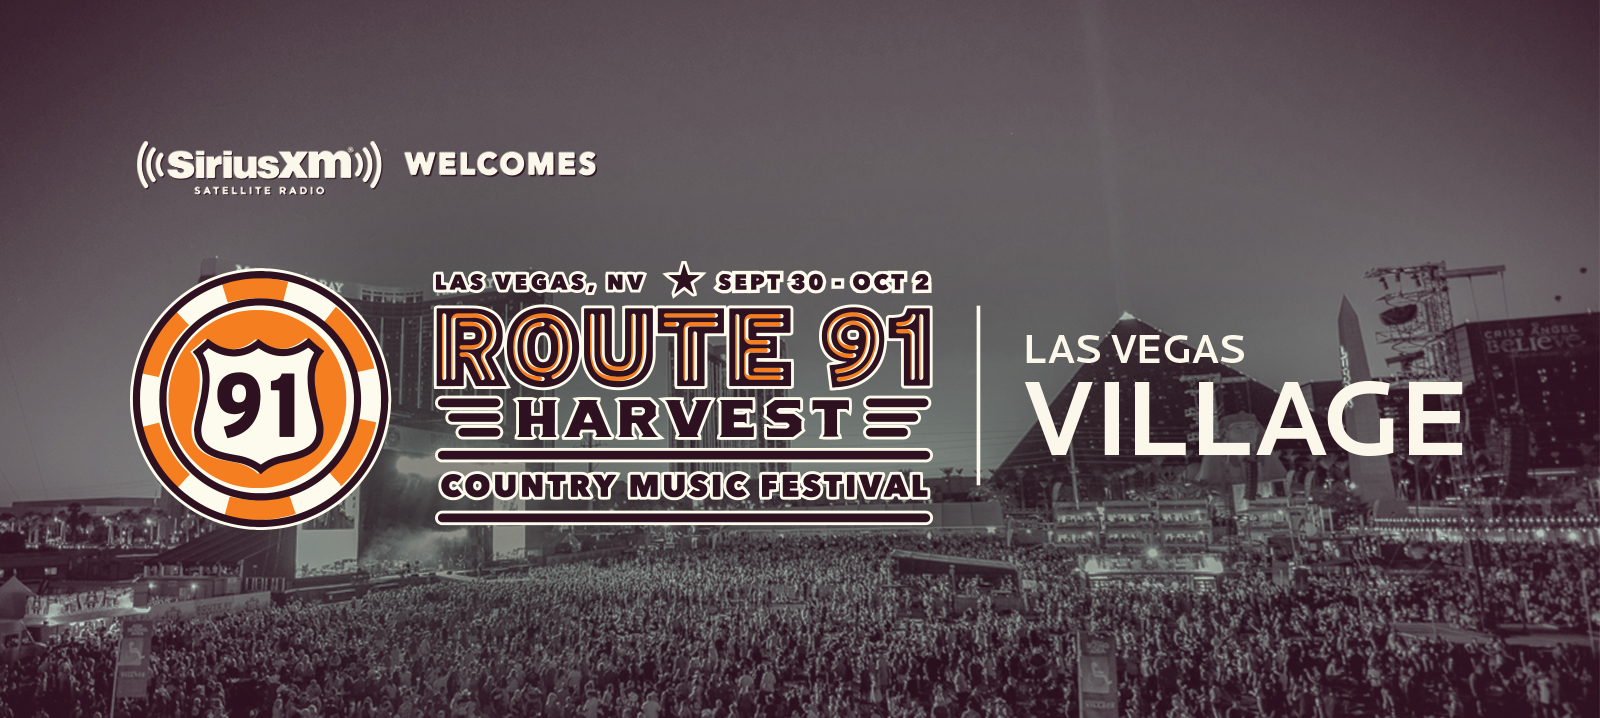 Route 91 Harvest Country Music Festival